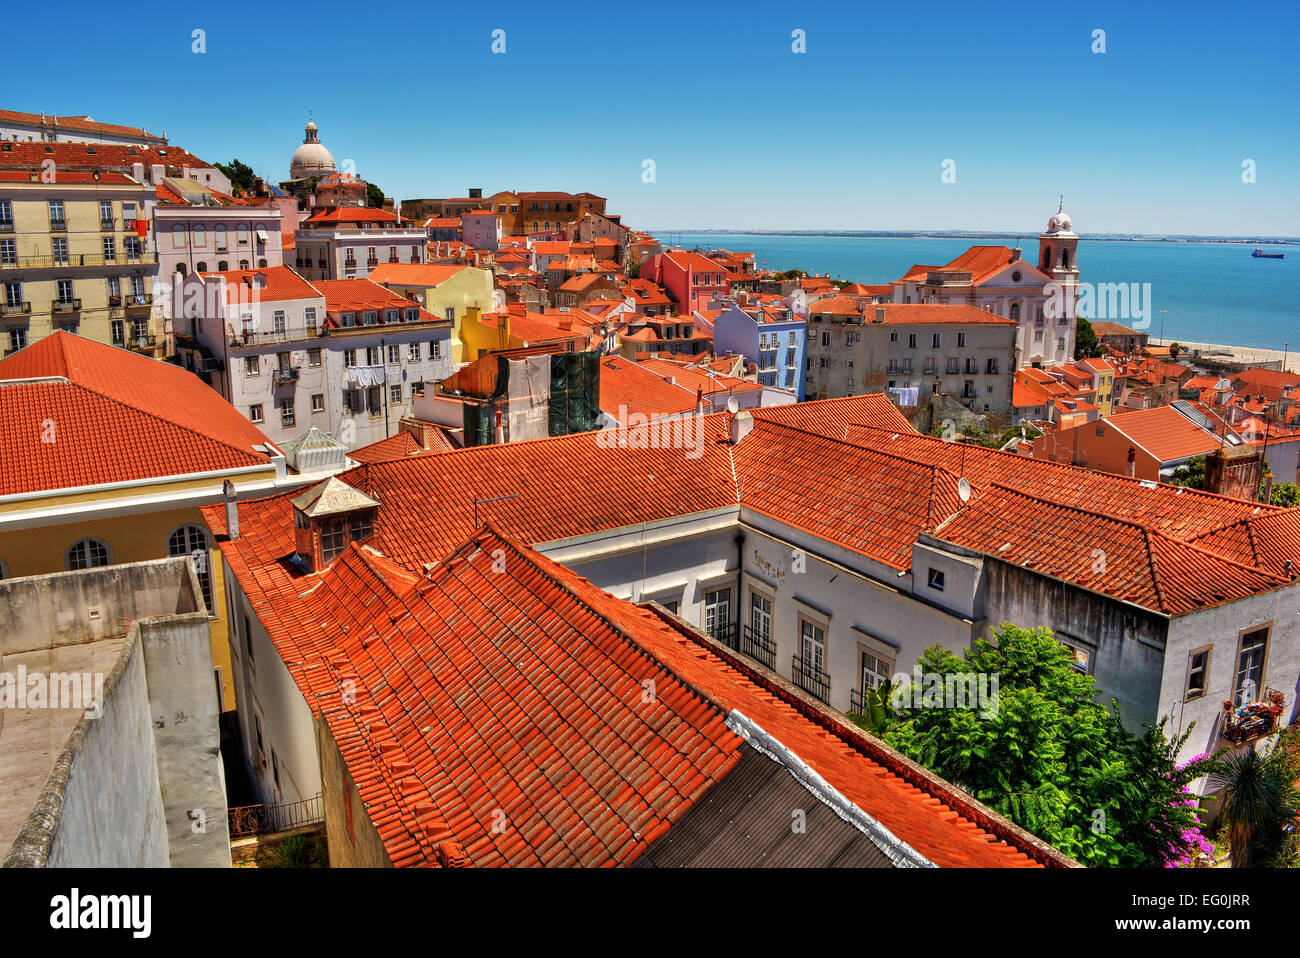 Portugal, Lisbon, High angle view of old town Stock Photo